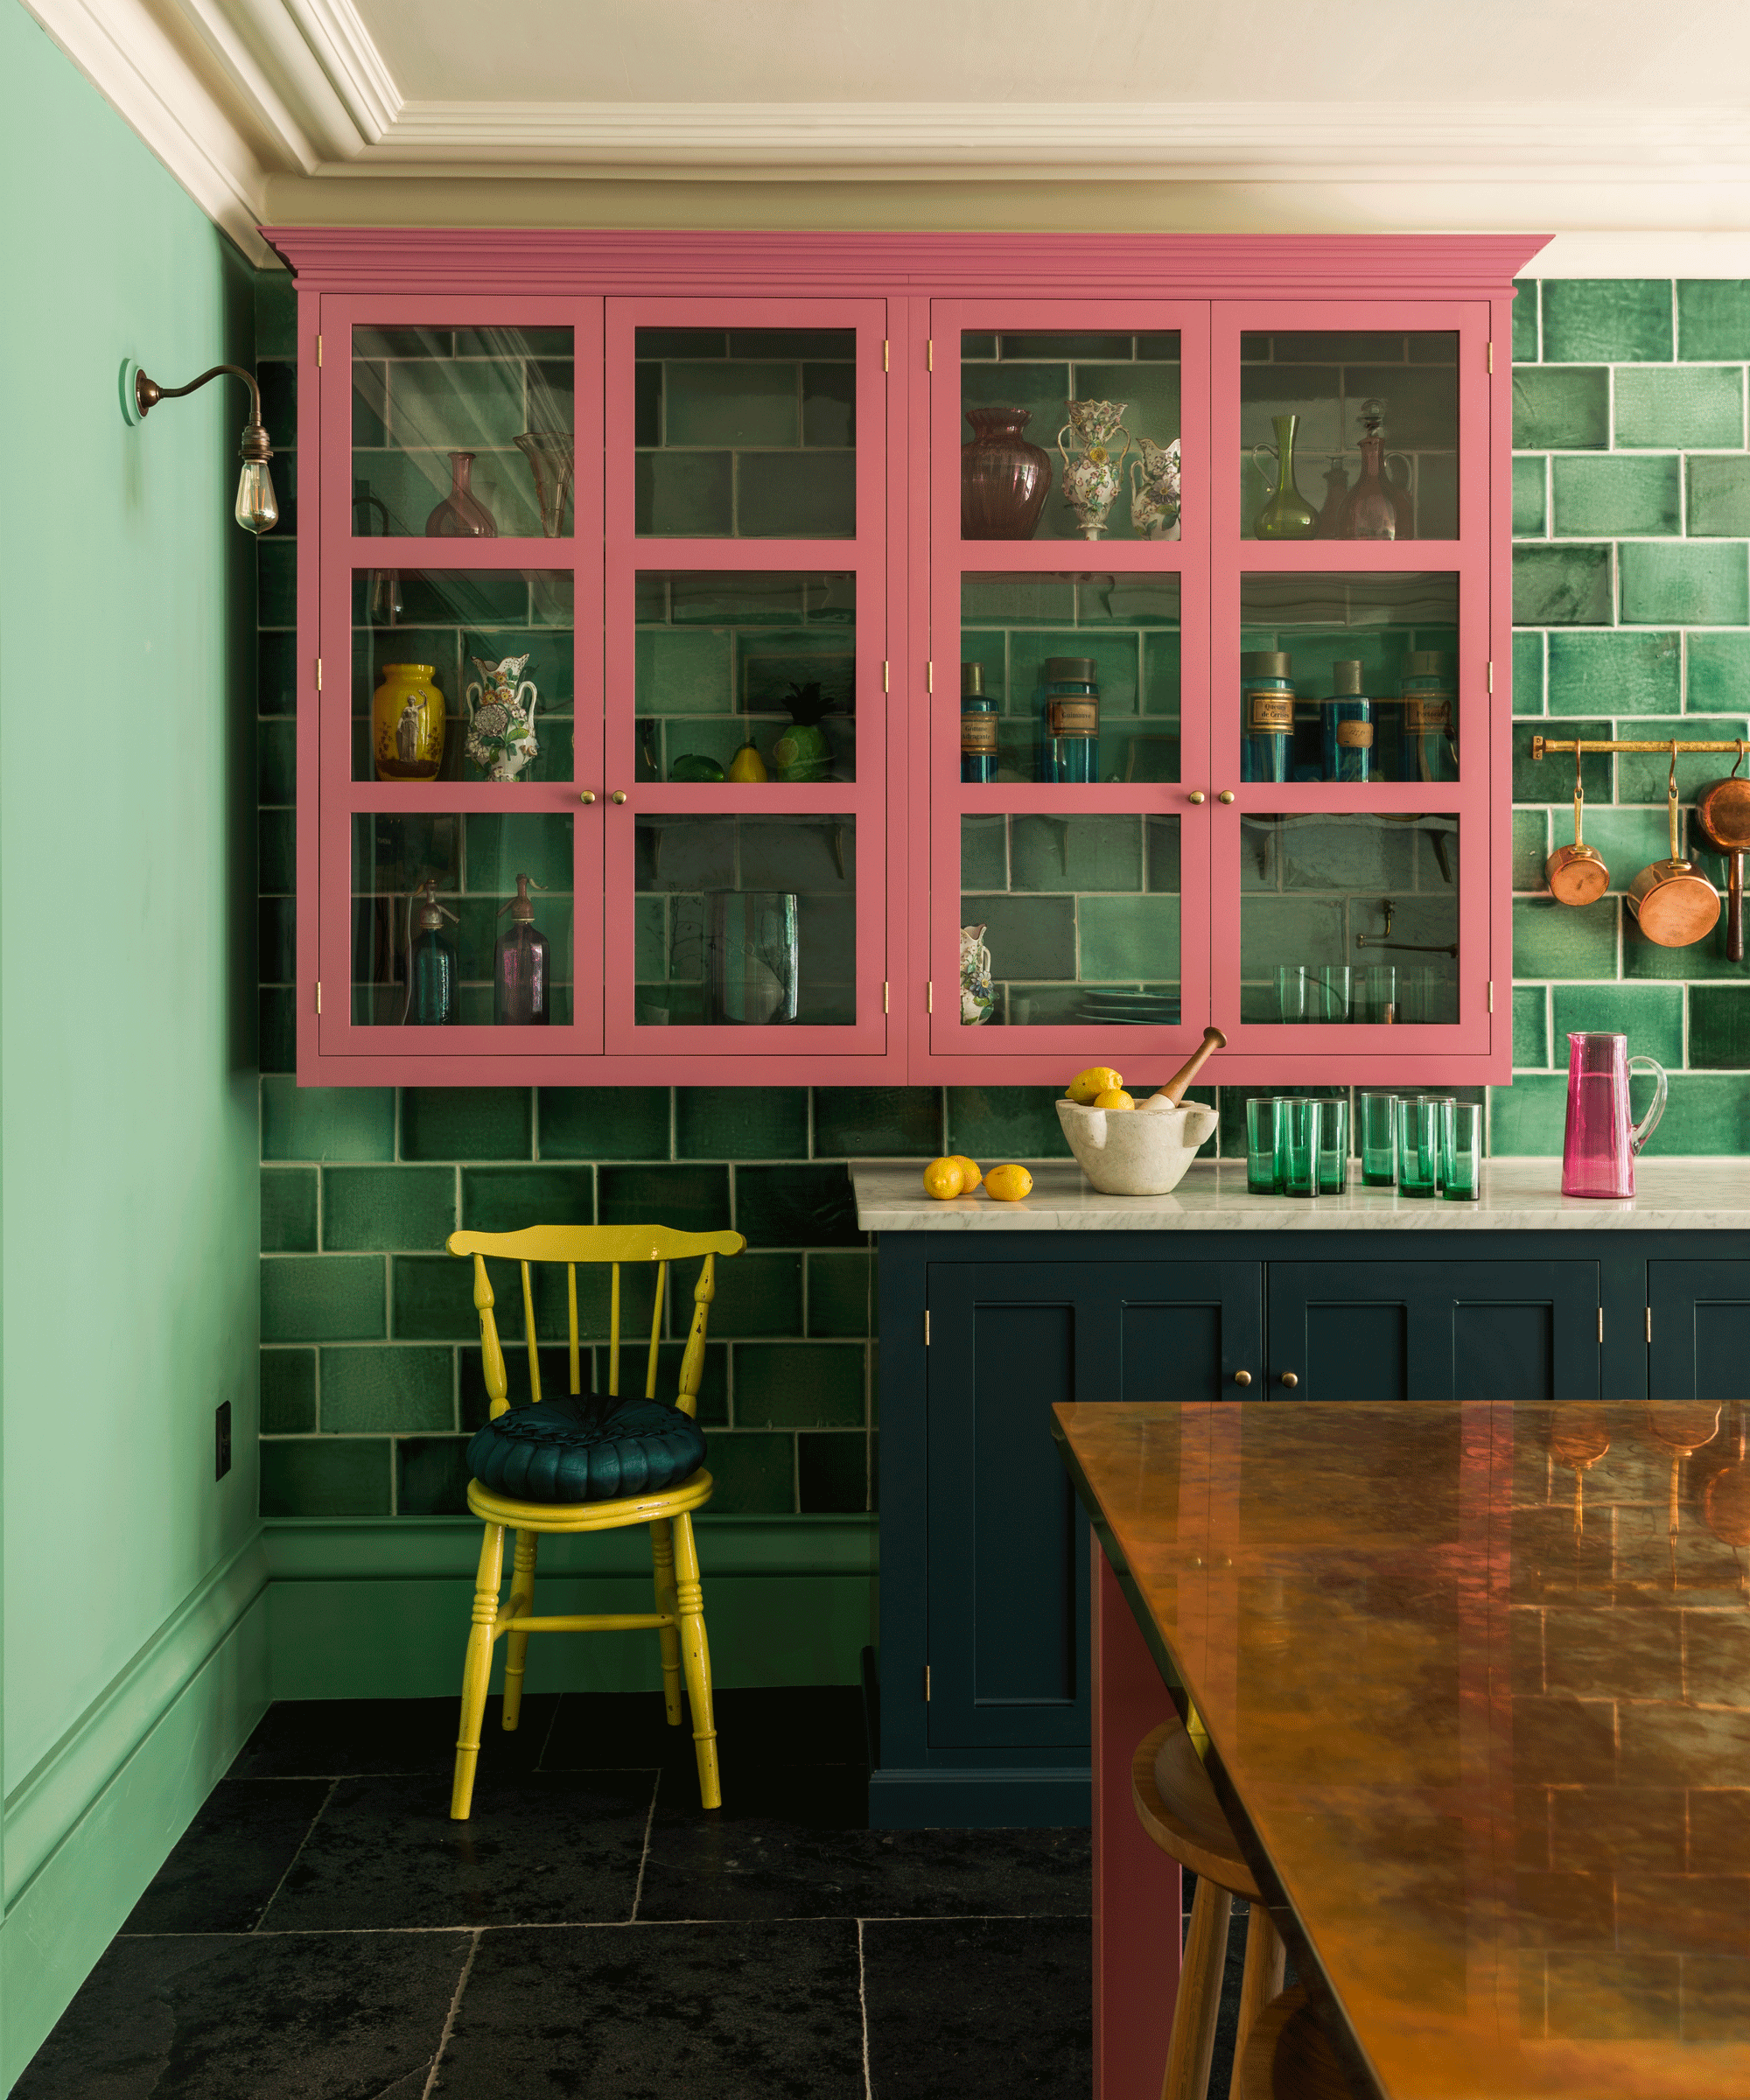 Two-tone kitchen with pink upper units and green tiled walls